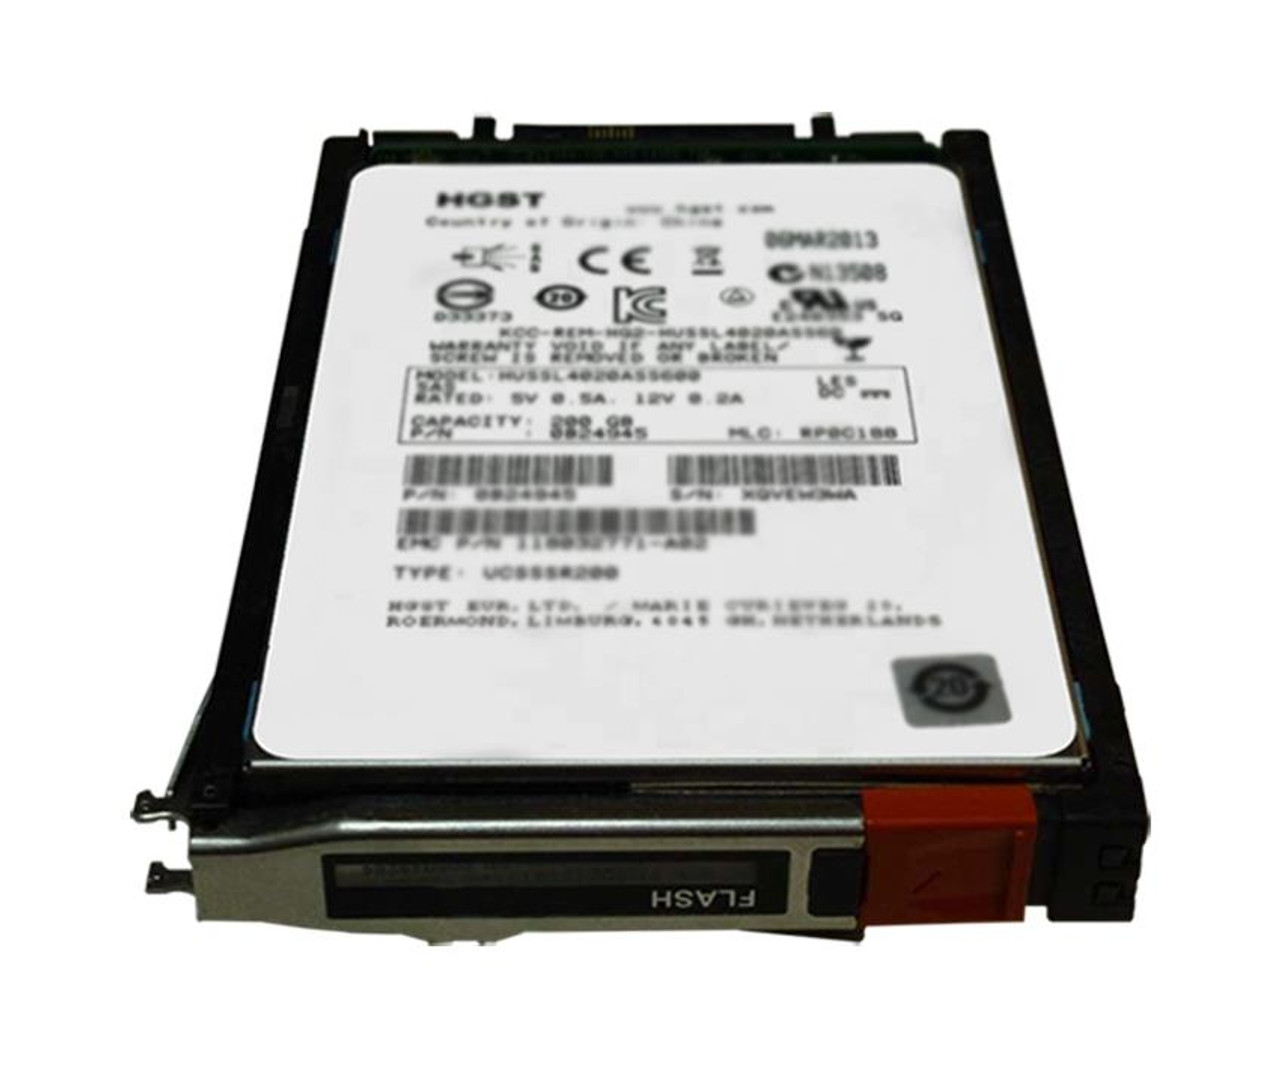 N5-2S6FX-800TU EMC 800GB SAS 6Gbps 2.5-inch Internal Solid State Drive (SSD) Upgrade for VNXe1600 25 x 2.5 Enclosure